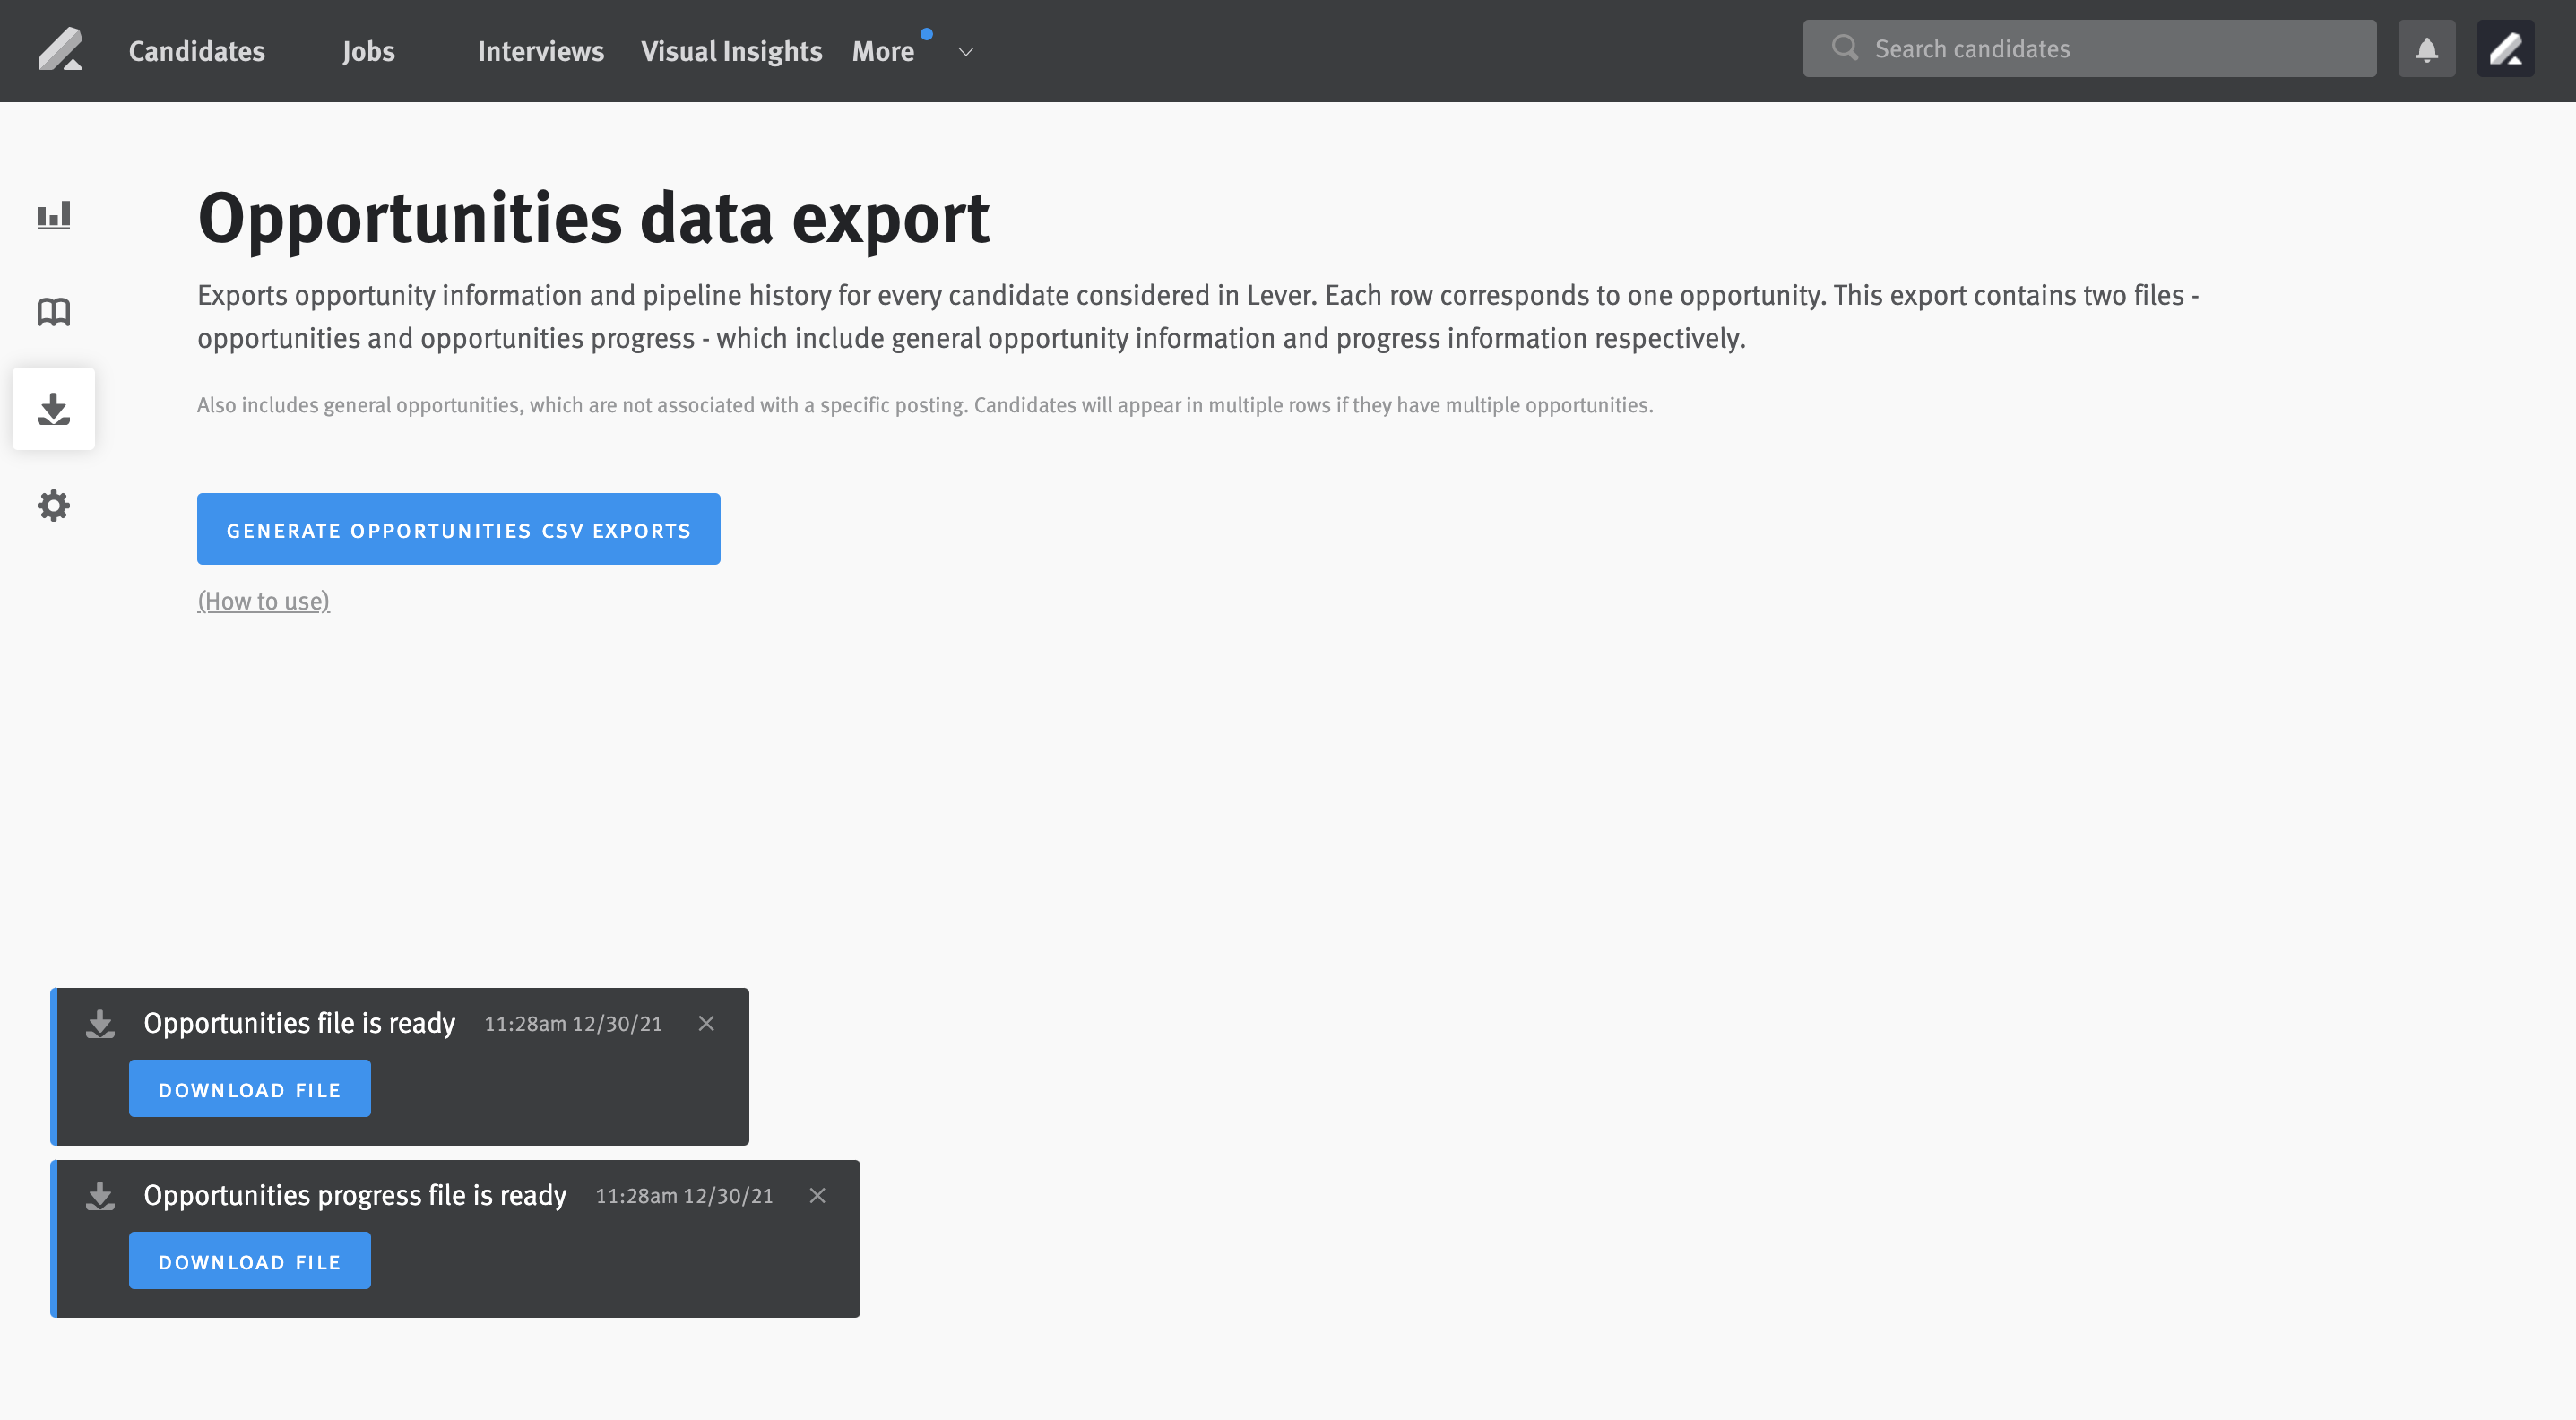 Opportunities export generator page with two pop-ups in lower-roght corner of screen indicating that exports are reay for download.